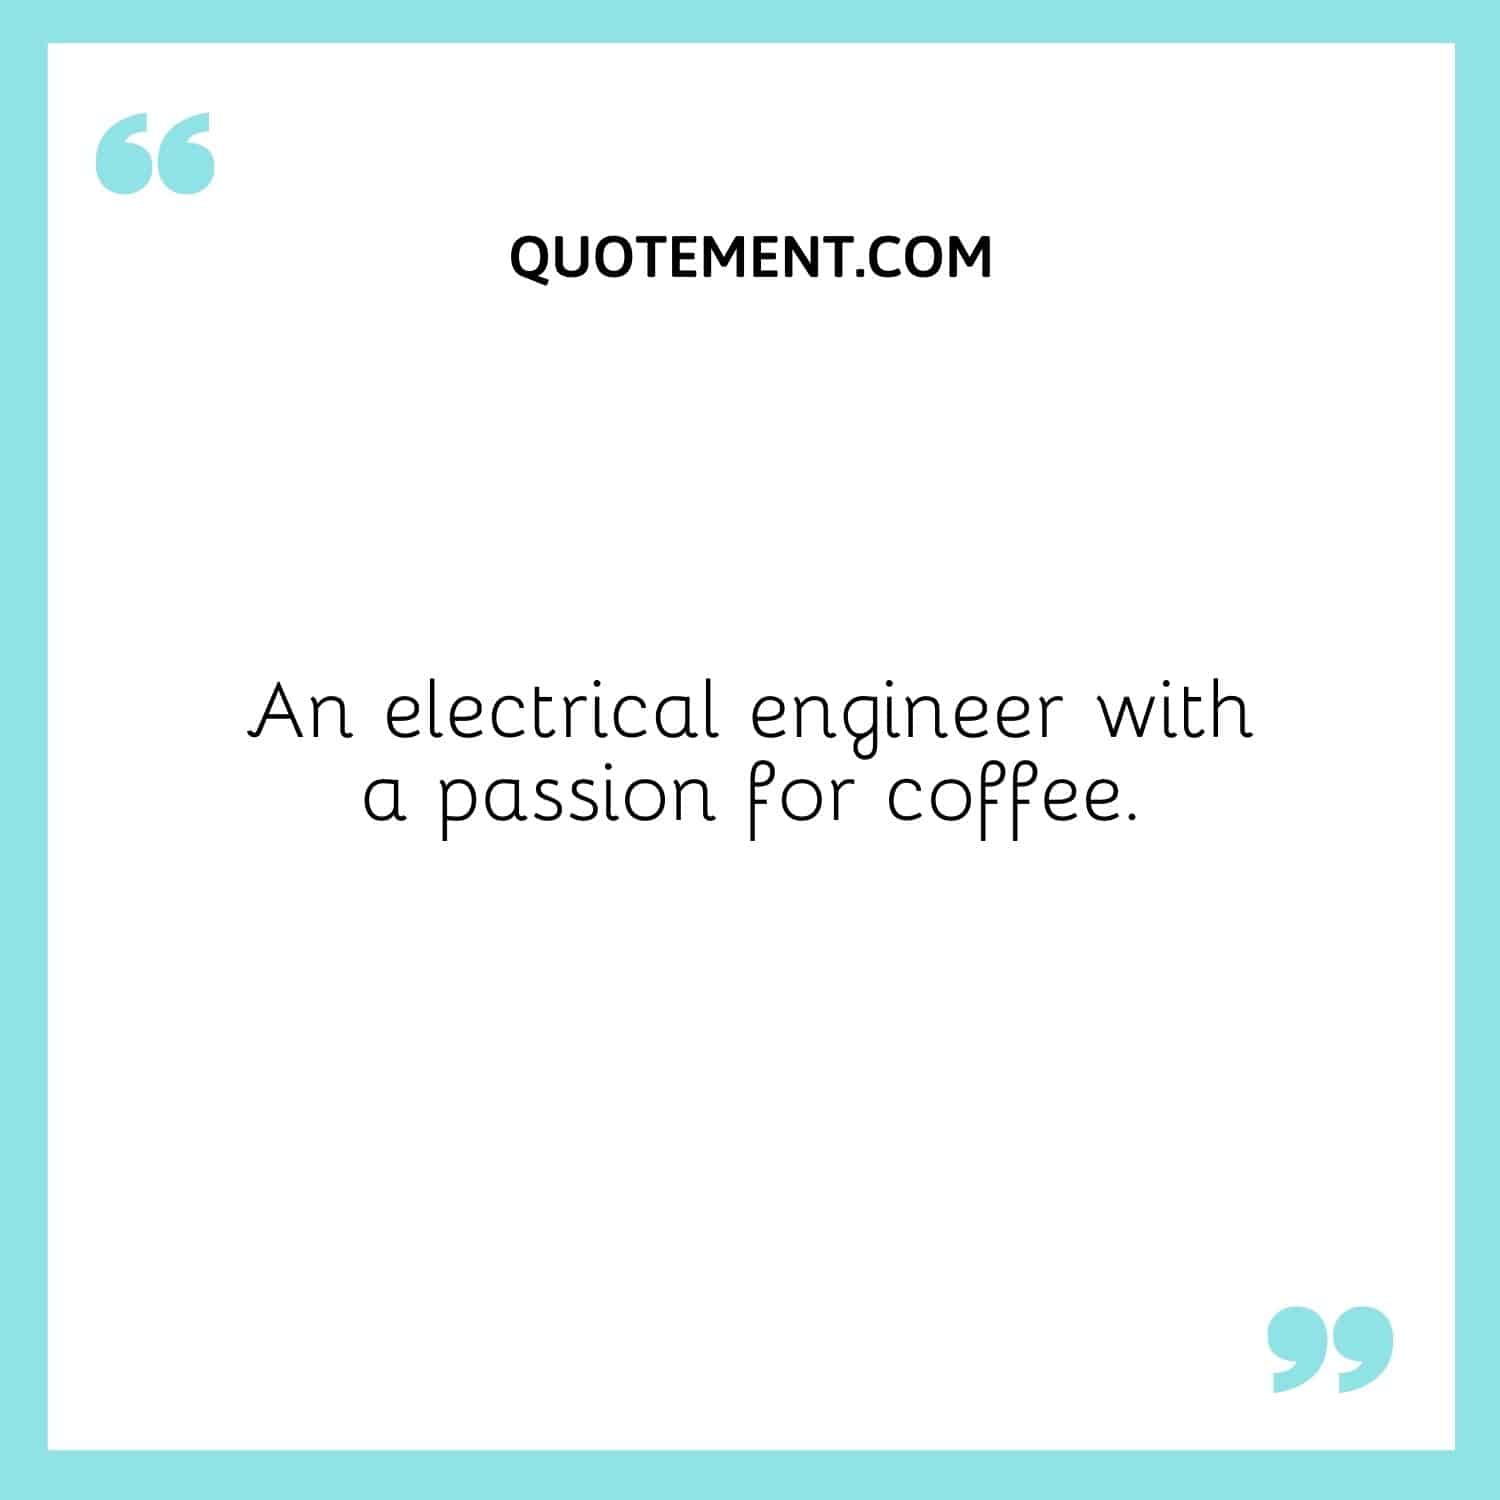 An electrical engineer with a passion for coffee.